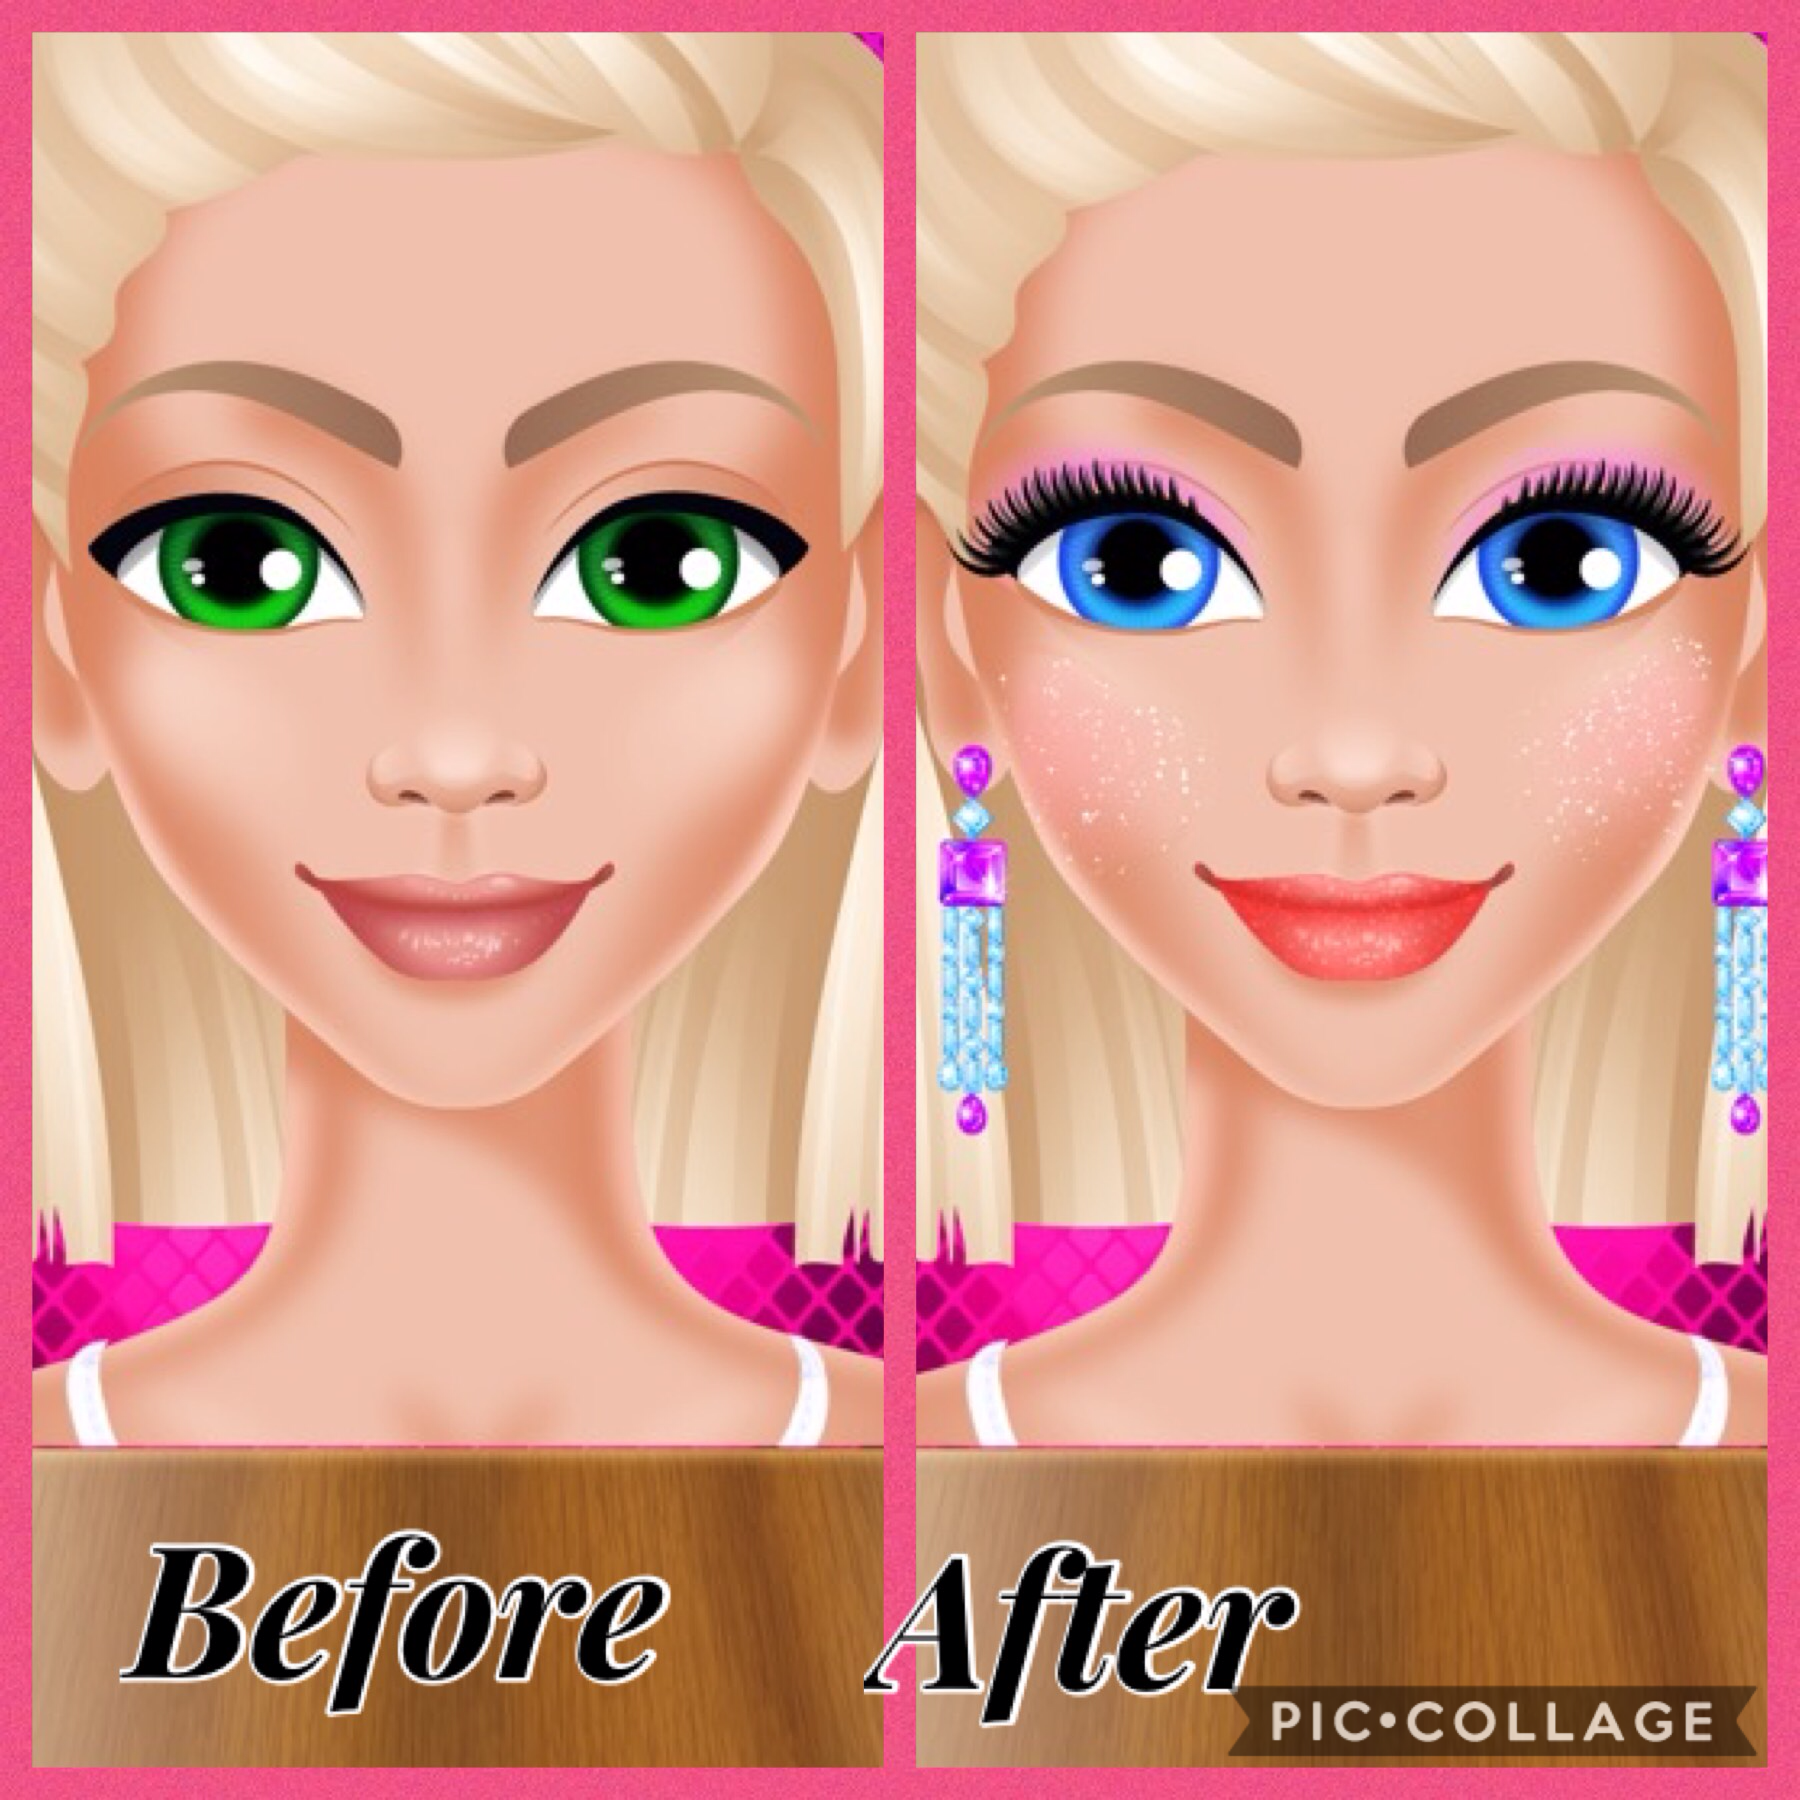 Before and after makeup!  What  girls look like before makeup and what girls look like after makeup!😊

P.S no offence to any girls judging I am a girl